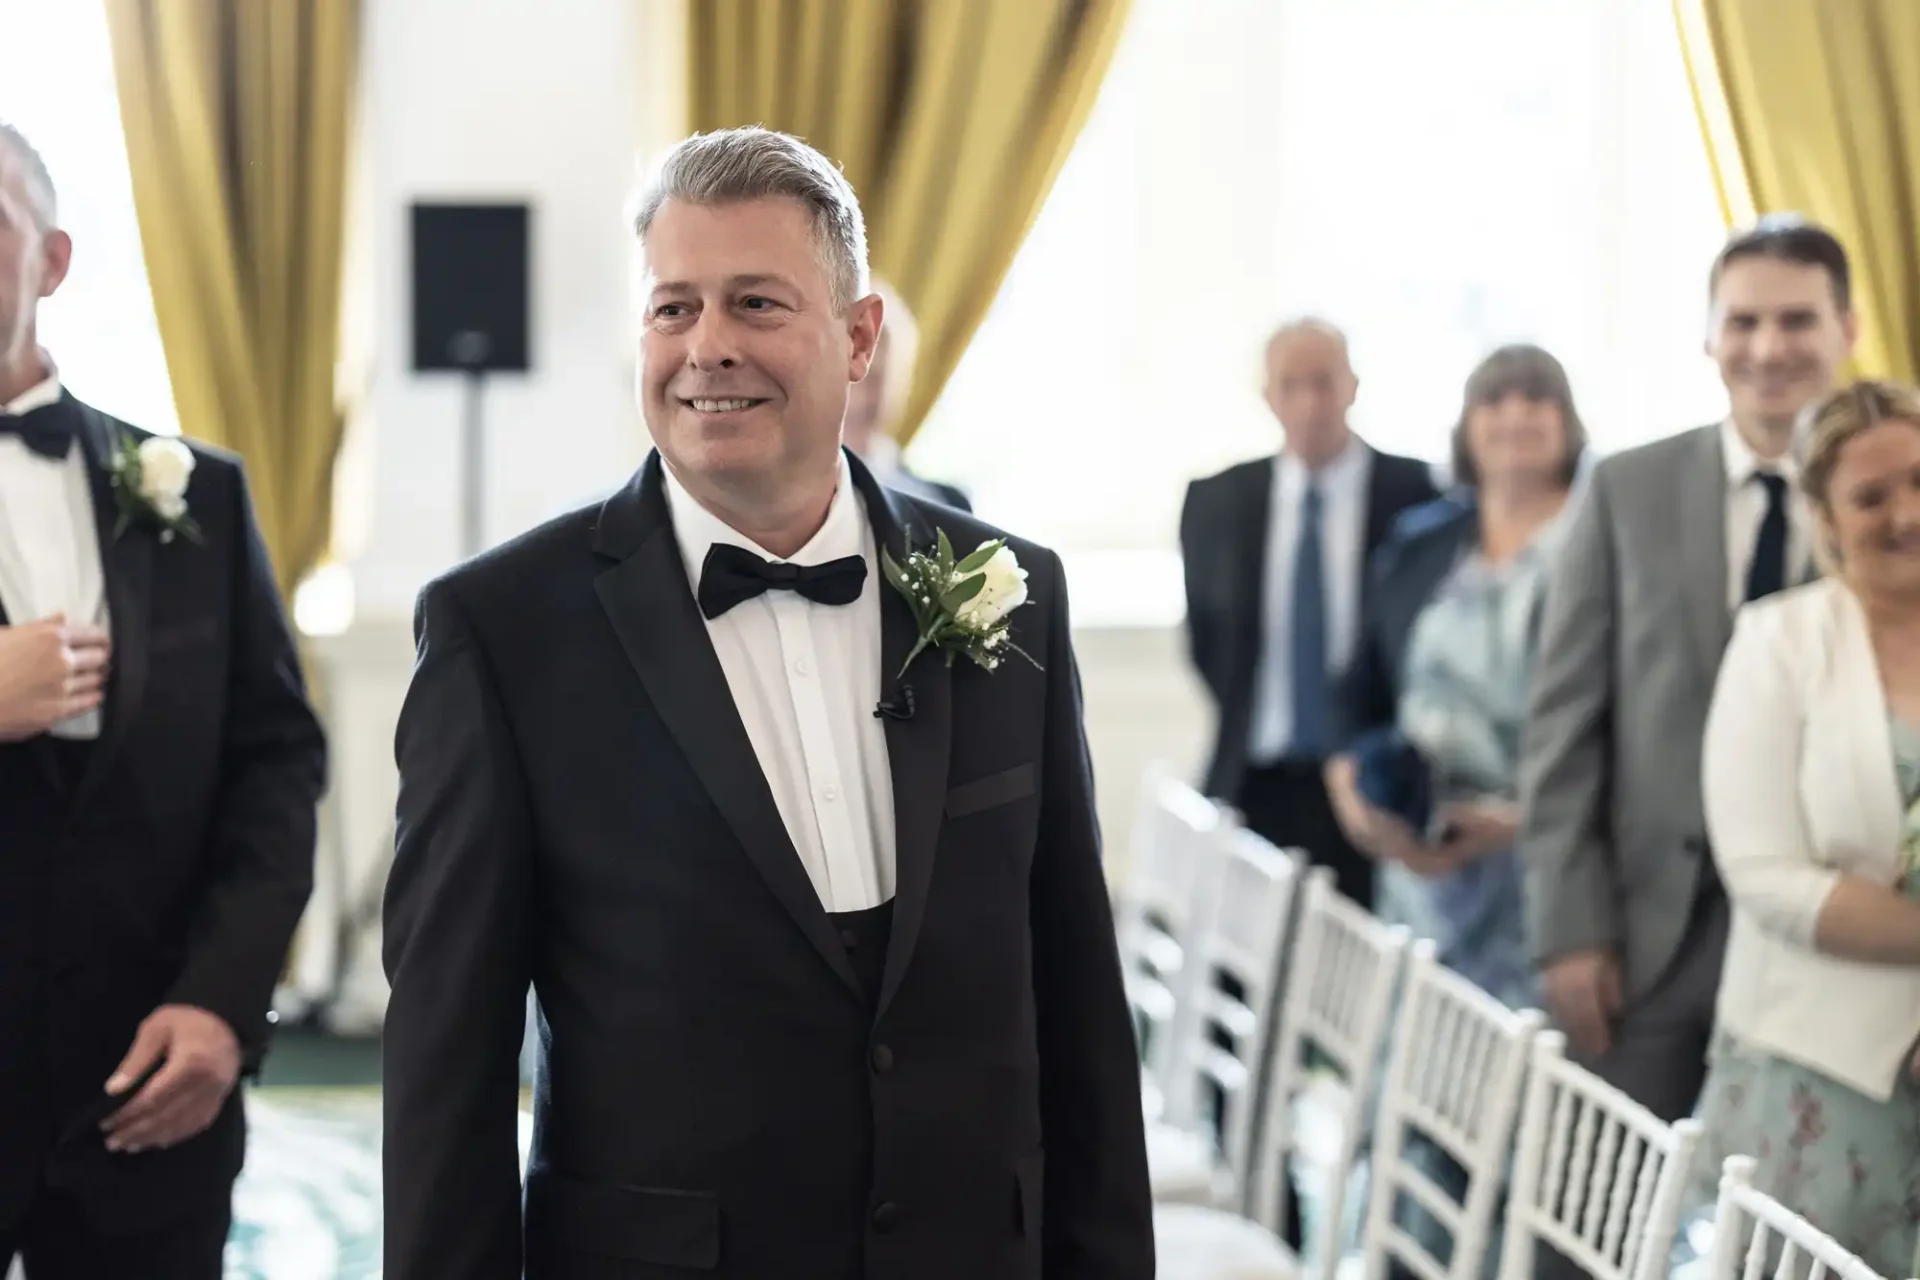 A smiling man in a tuxedo with a boutonniere stands at a wedding ceremony, surrounded by guests in a well-lit room with white chairs.